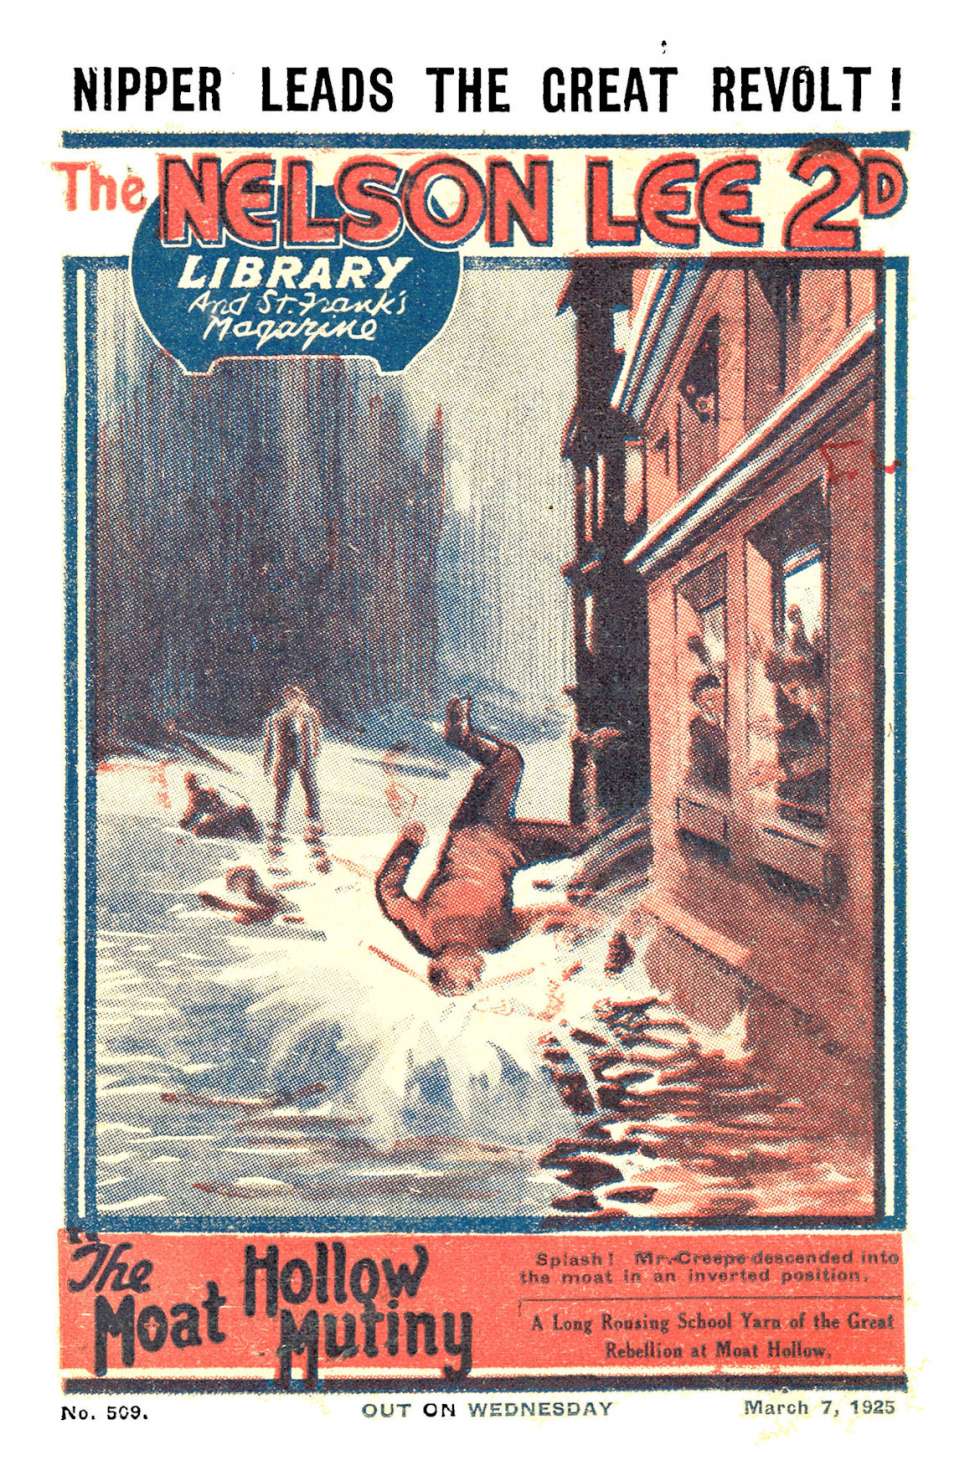 Book Cover For Nelson Lee Library s1 509 - The Moat Hollow Mutiny